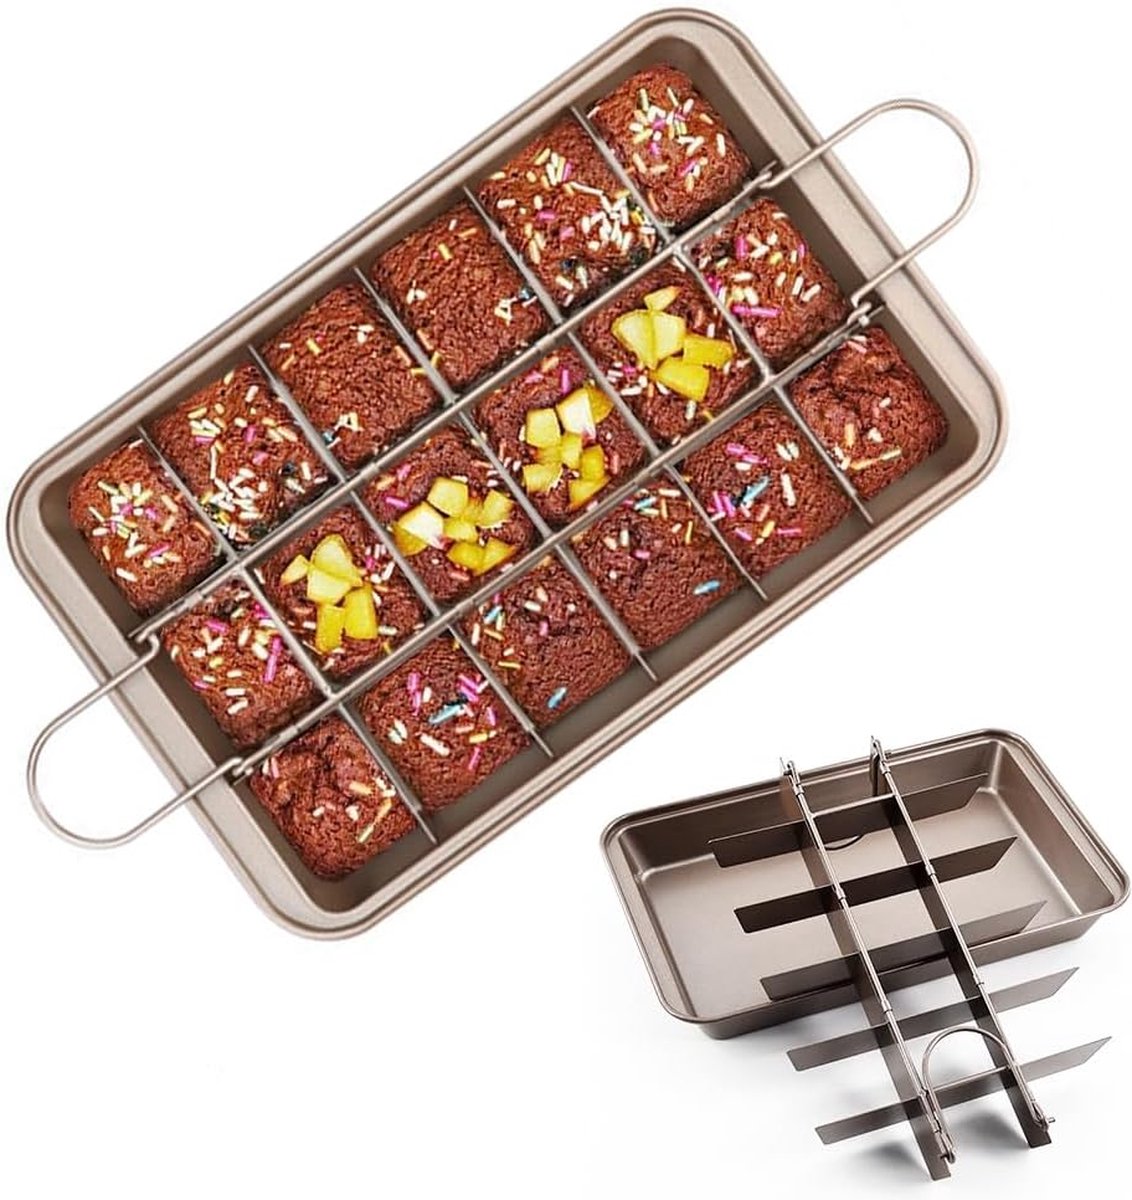 Brownie Baking Mould Non-Stick Carbon Steel Cake Mould Brownie Adjustable Baking Moulds Cookies Cake Mould with Non-Stick Coating for Party, Birthday